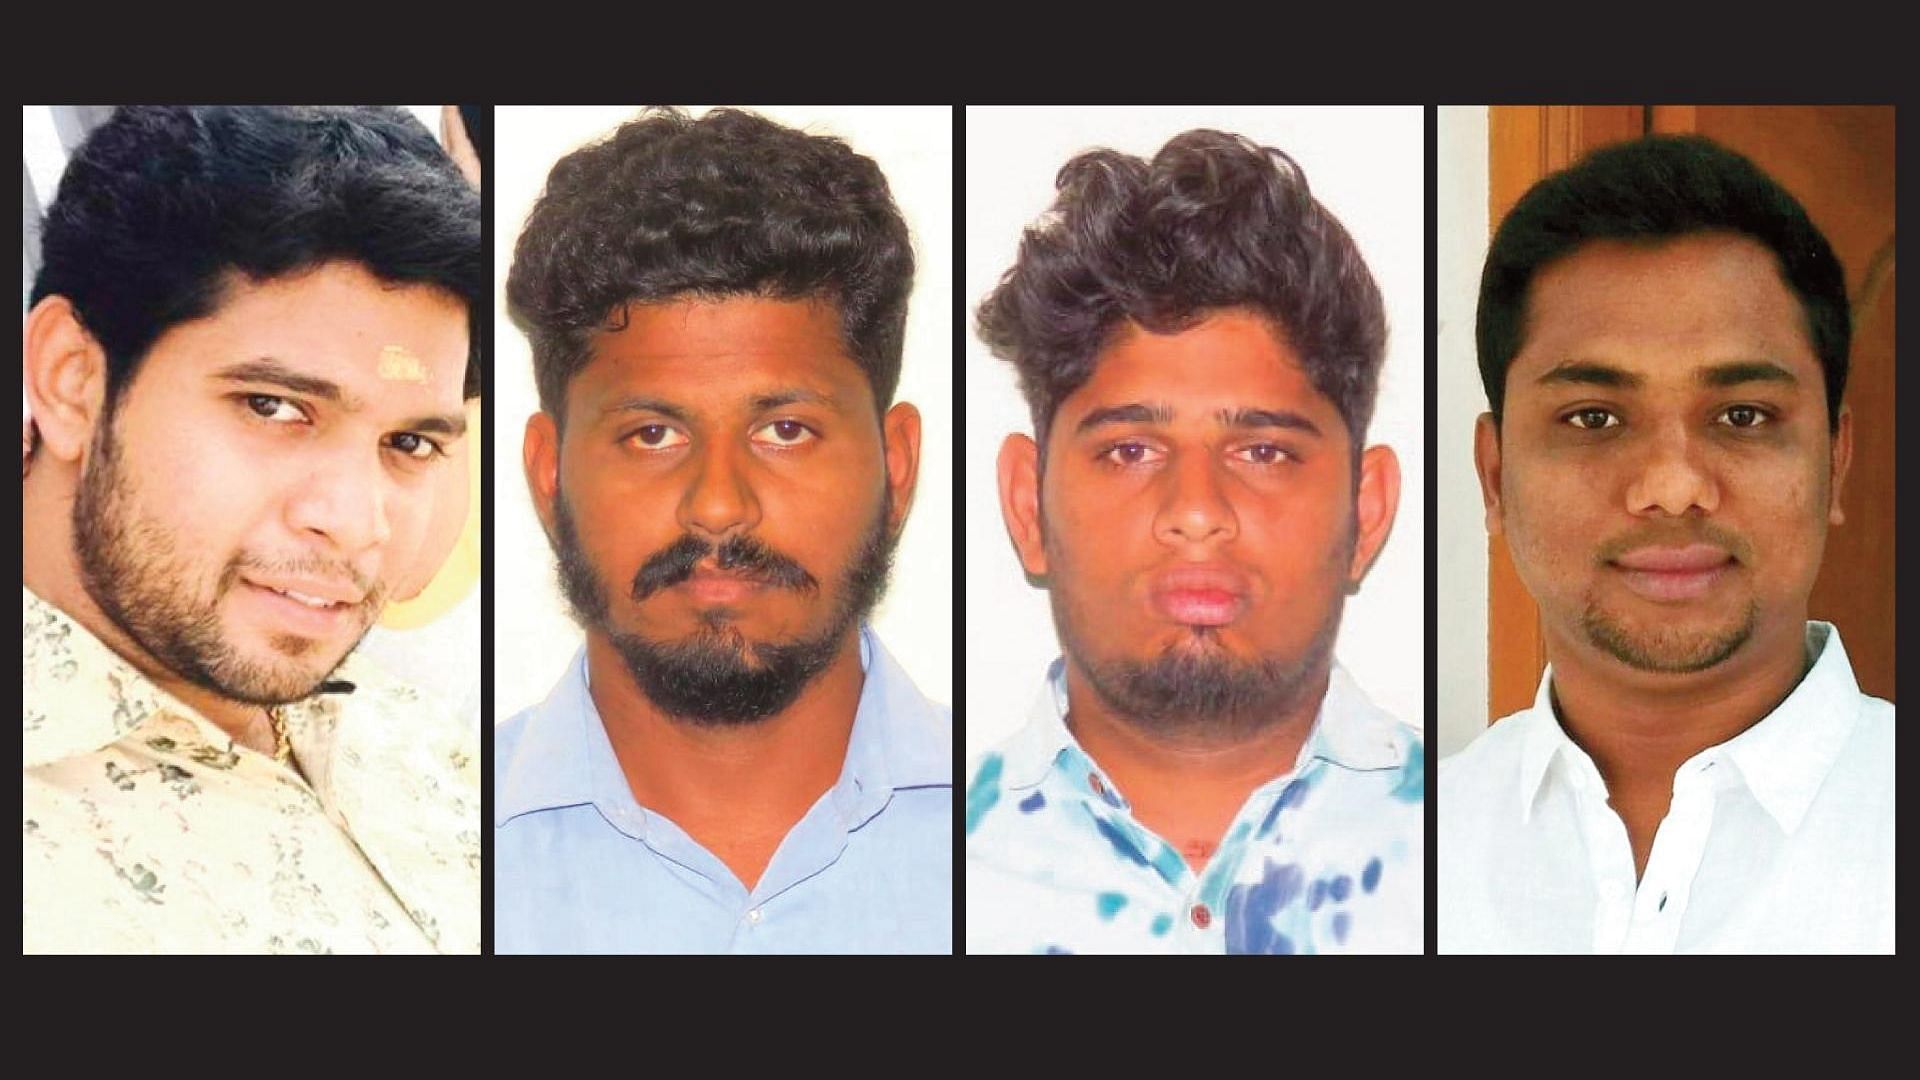 Thirunavukkarasu, Sabarirajan, Vasanthakumar and Satish - the four youths who were arrested in connection with the sexual assault of young girls in Pollachi, Tamil Nadu.&nbsp;